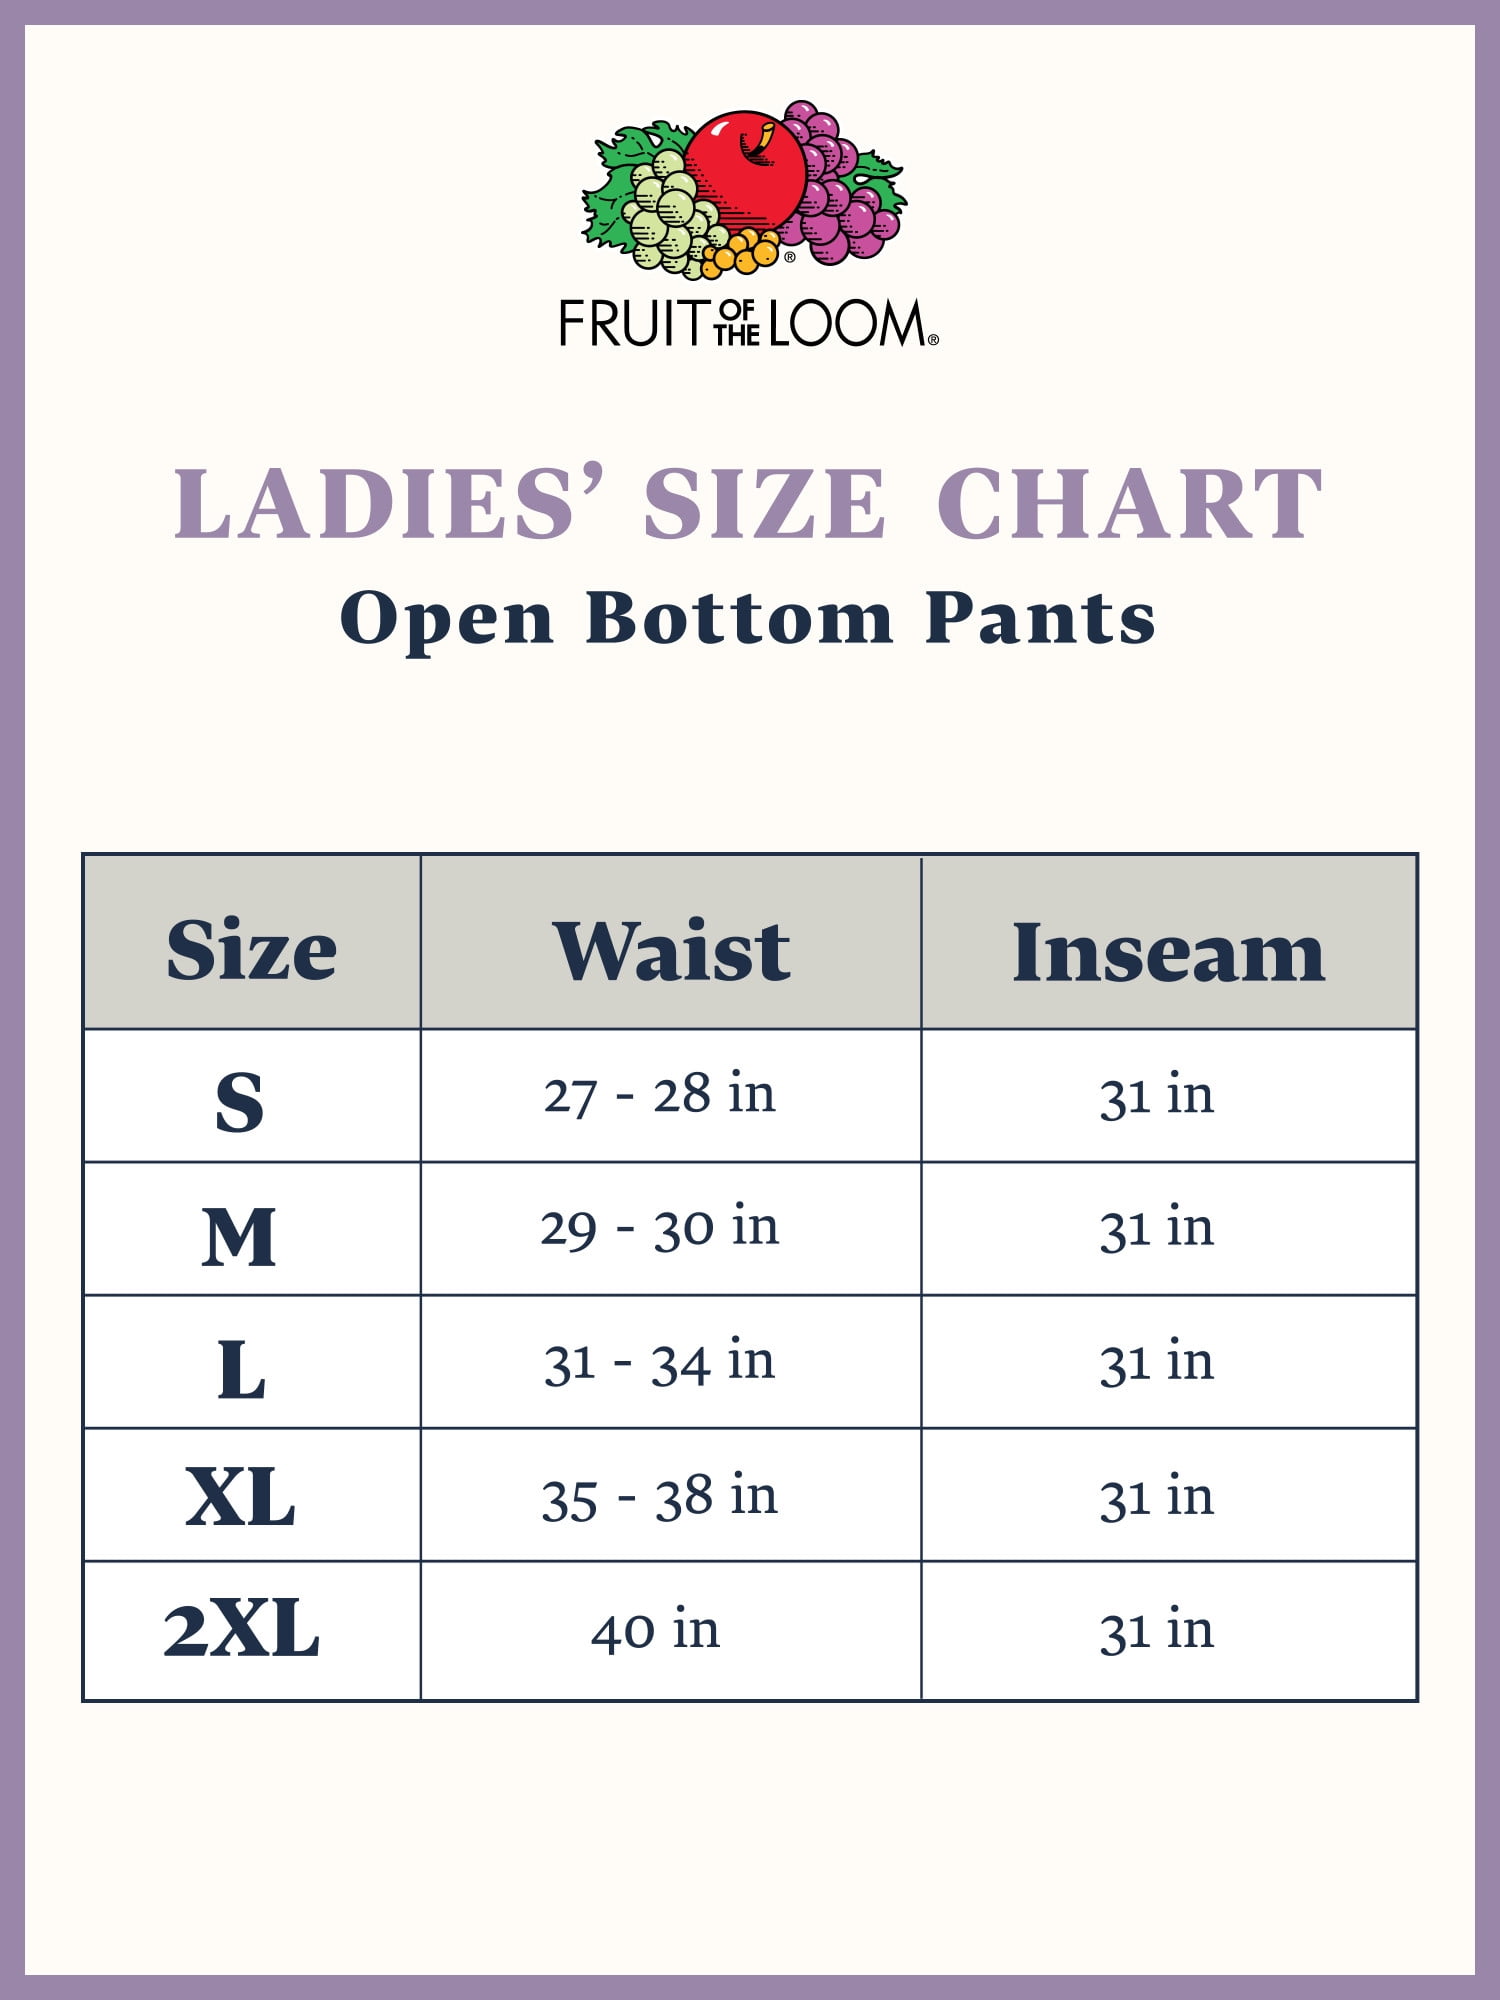 Fruit Of The Loom Color Chart 2017 | Arts - Arts